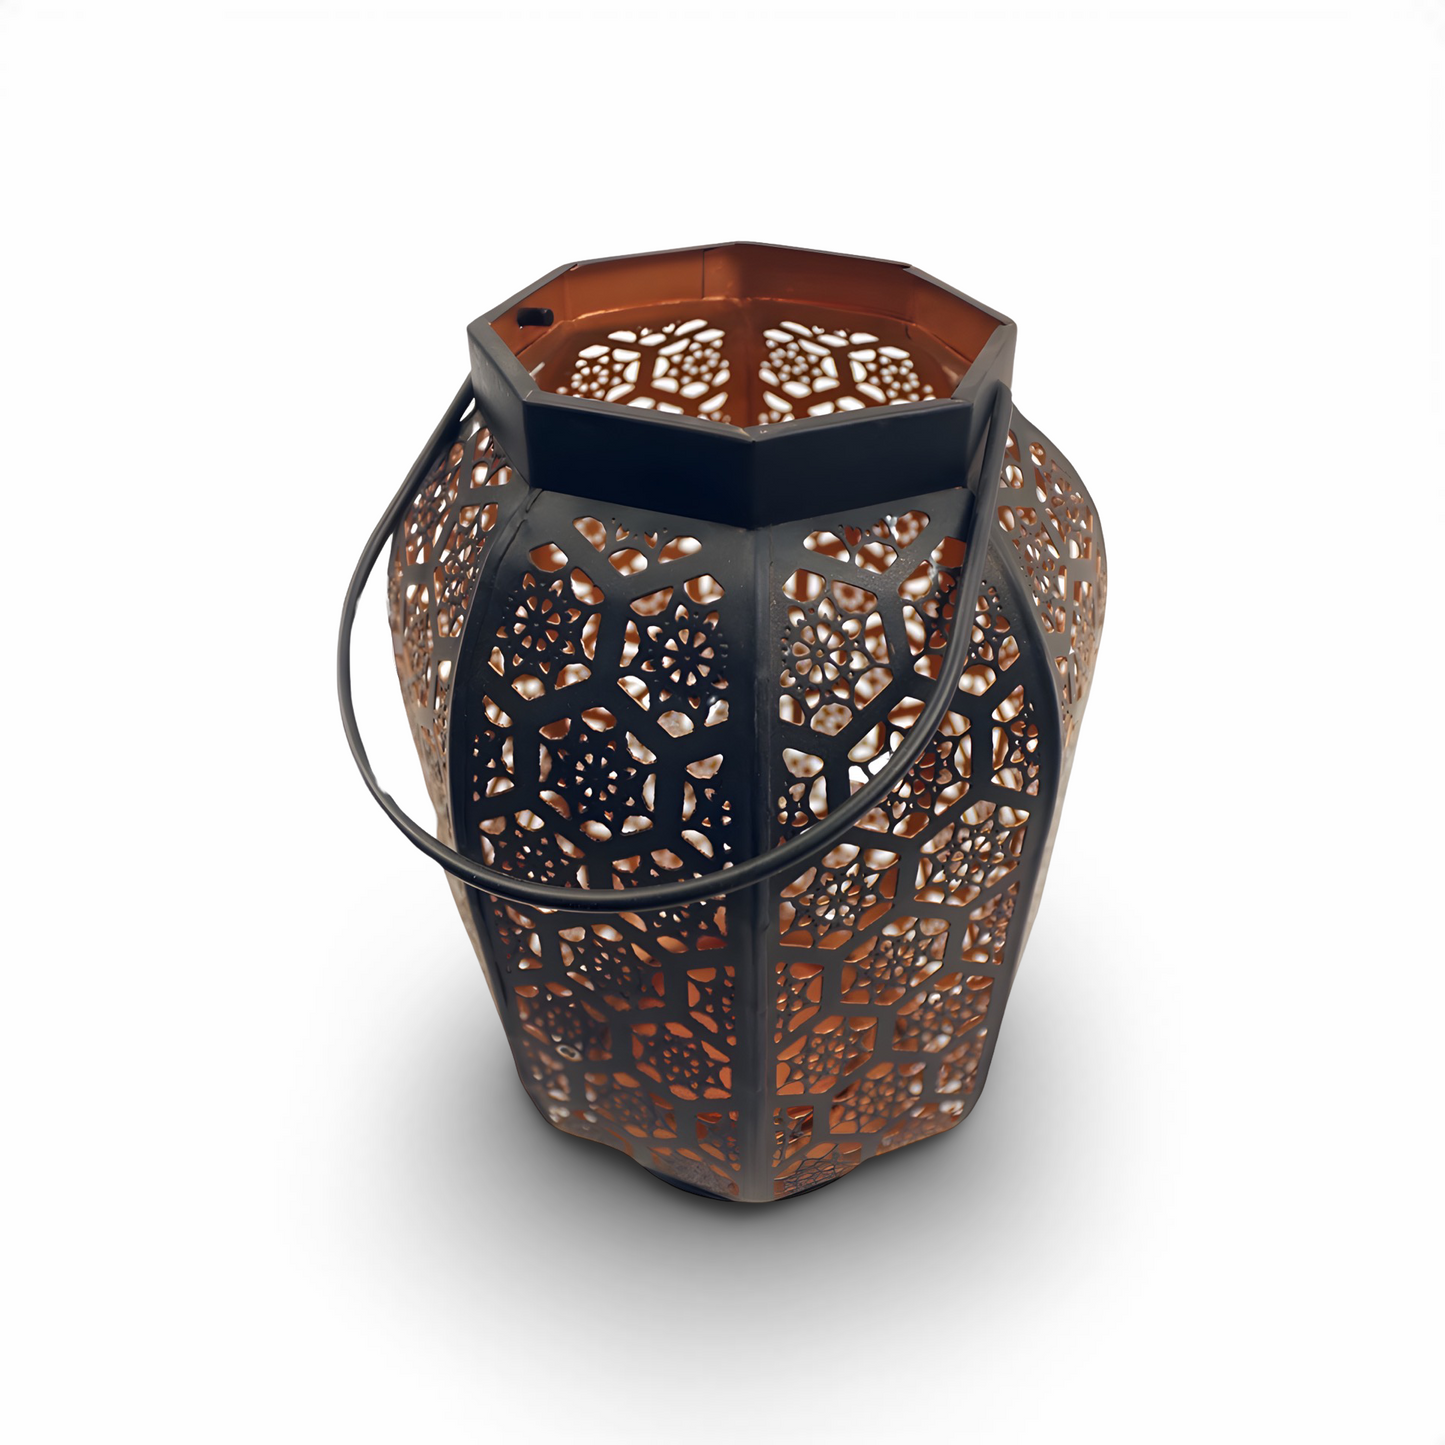 Discover the allure of our premium Black Matt Lantern, crafted with metal to create an exquisite blend of tradition and contemporary design lanterns. Elevate your space with flickering light, Buy now